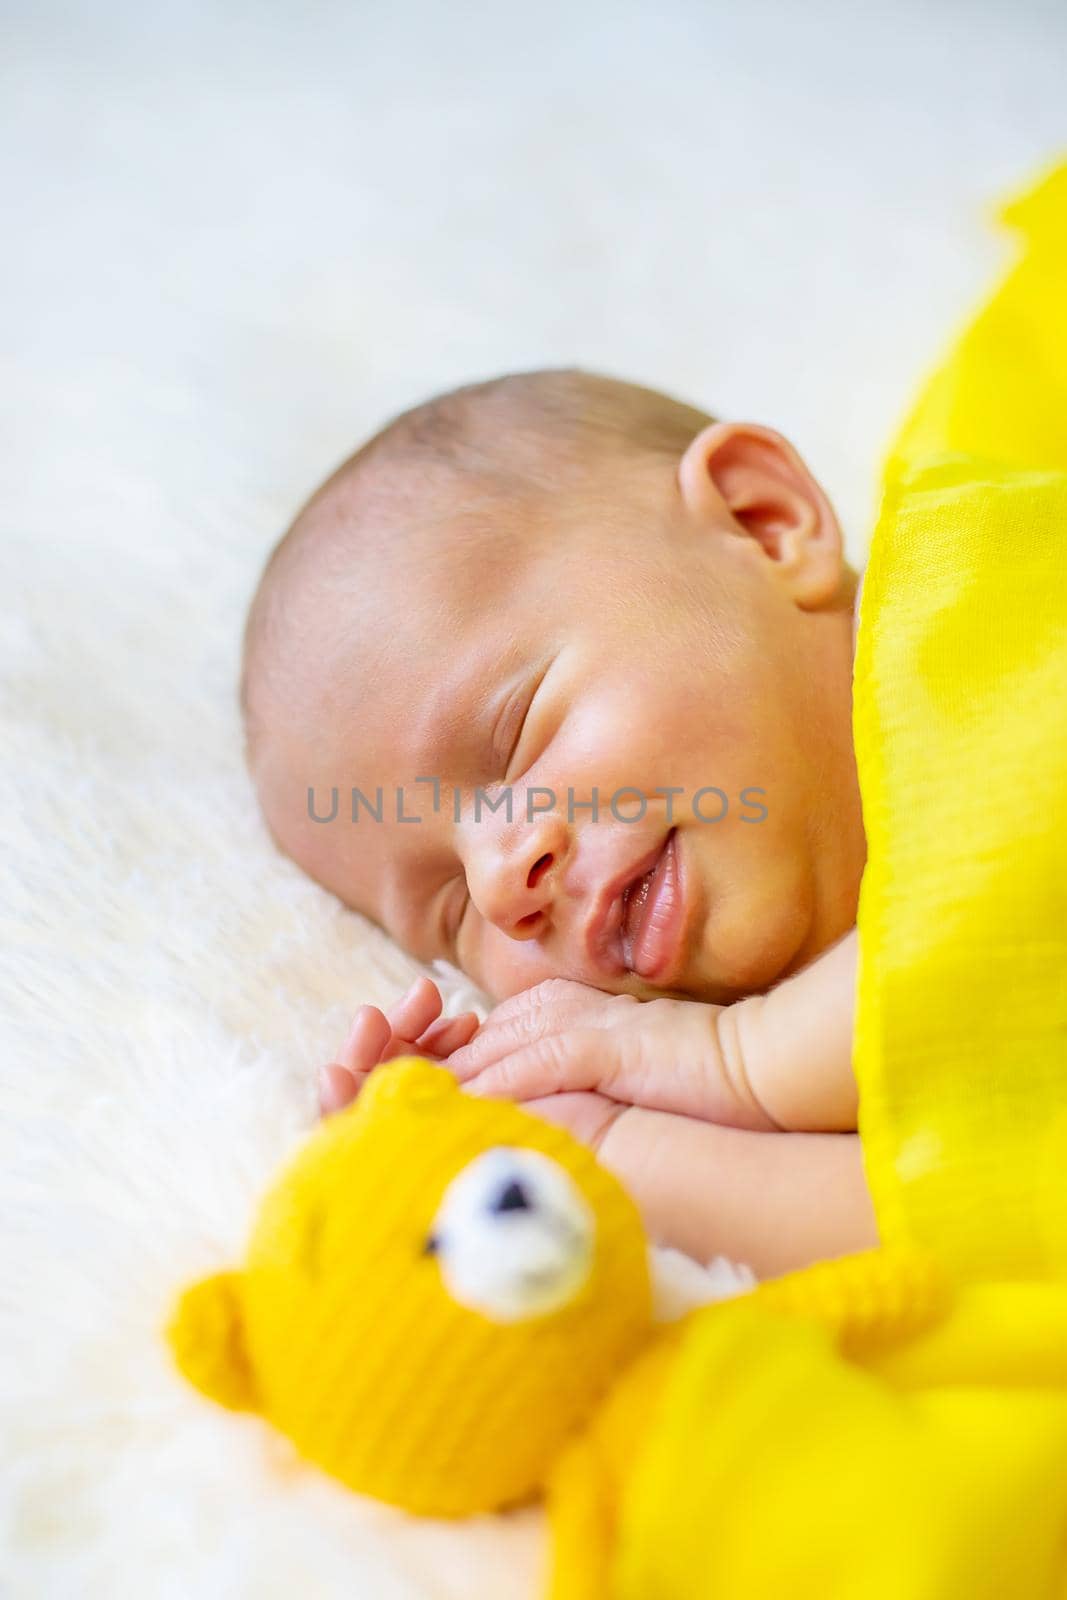 Newborn baby sleeping on a white background. Selective focus. people.